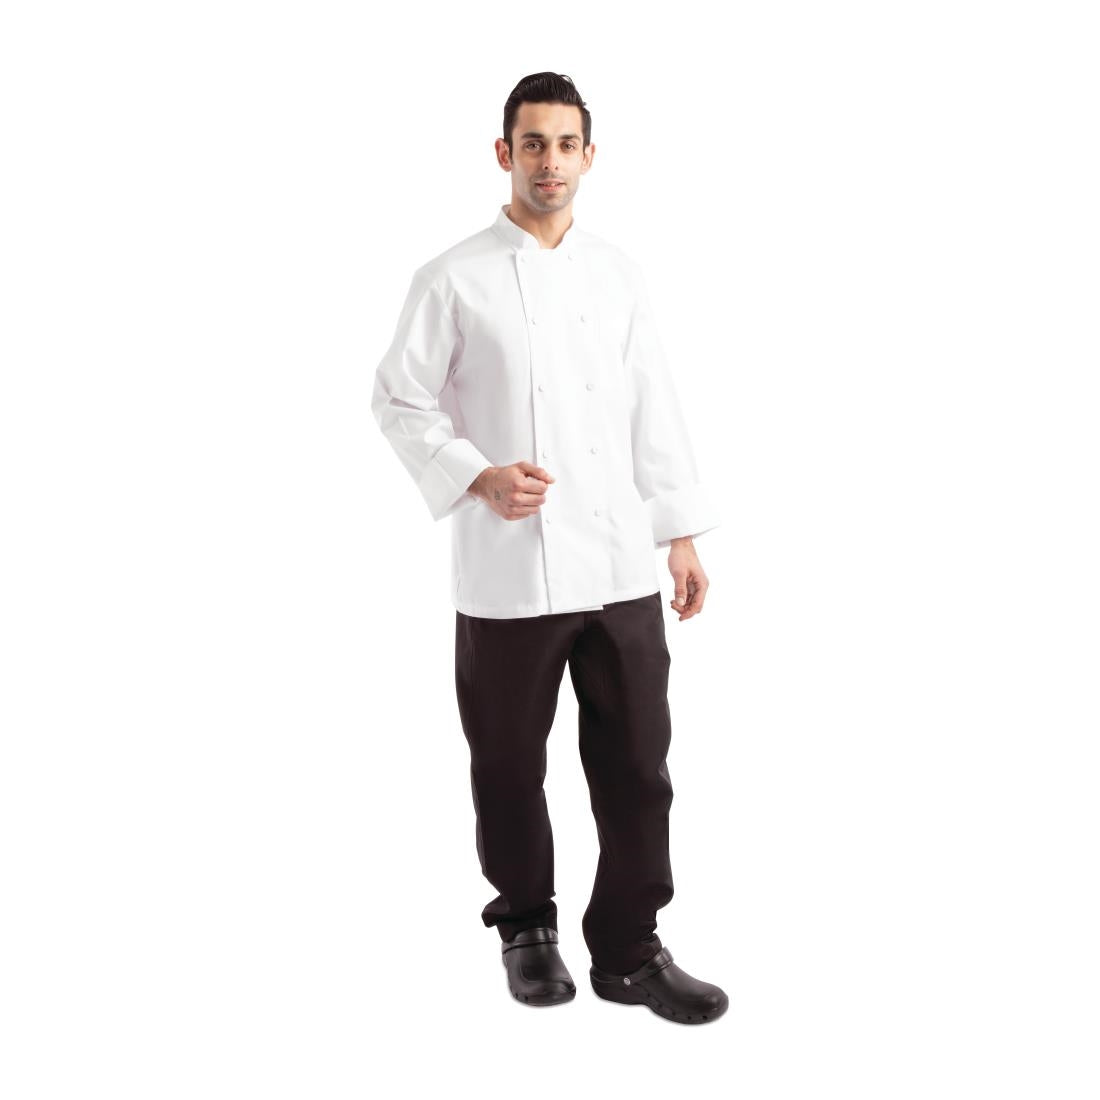 B649-M Chef Works Calgary Long Sleeve Cool Vent Unisex Chefs Jacket White M JD Catering Equipment Solutions Ltd